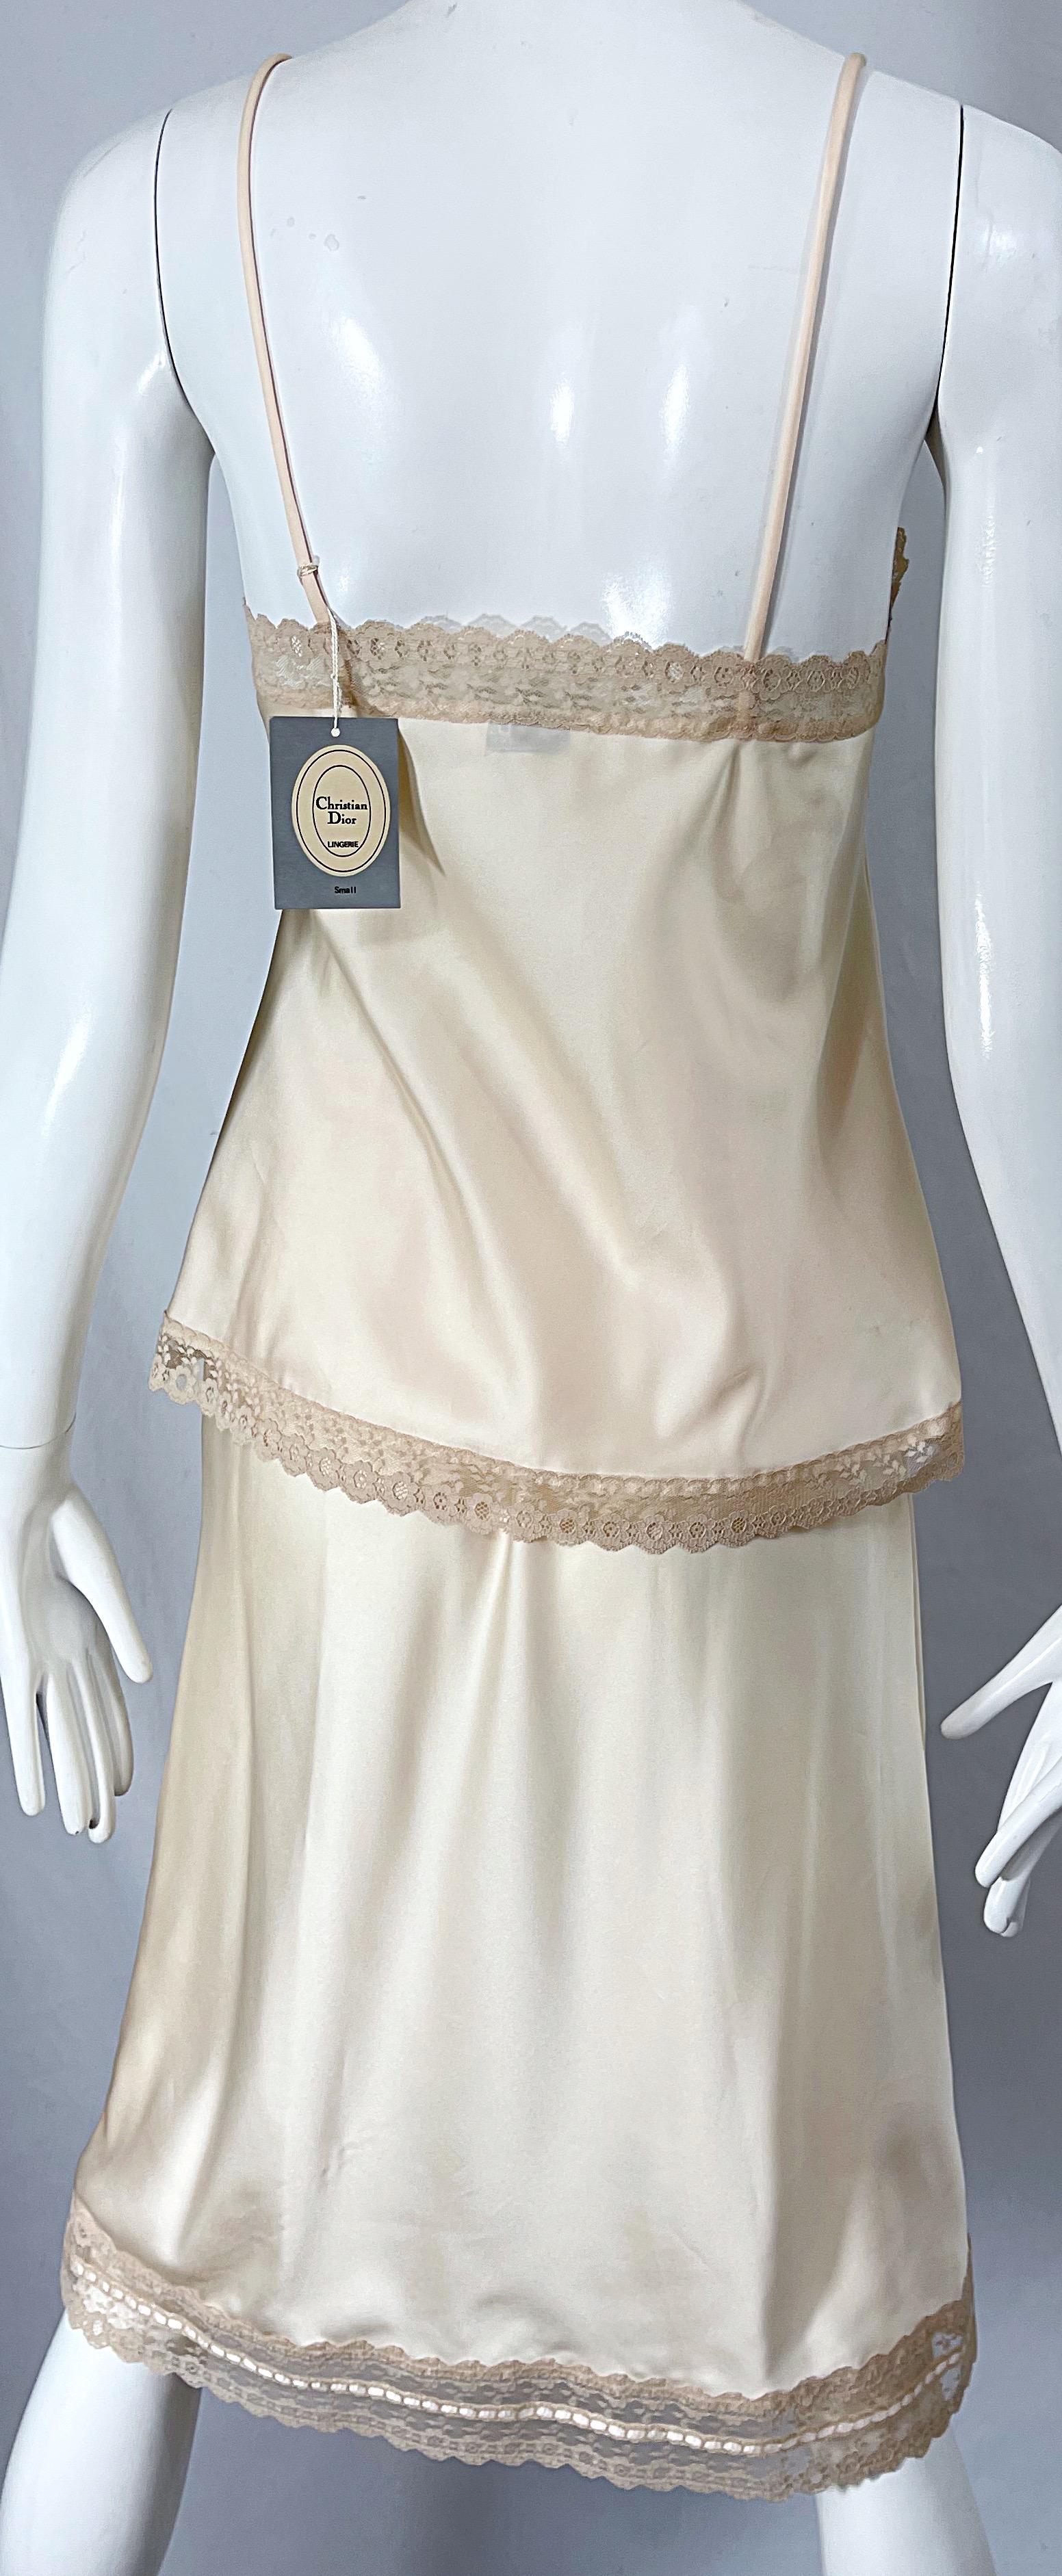 NWT 1980s Christian Dior Ivory Satin Lace Three Piece Cami 80s Lingerie PJ Set  For Sale 3